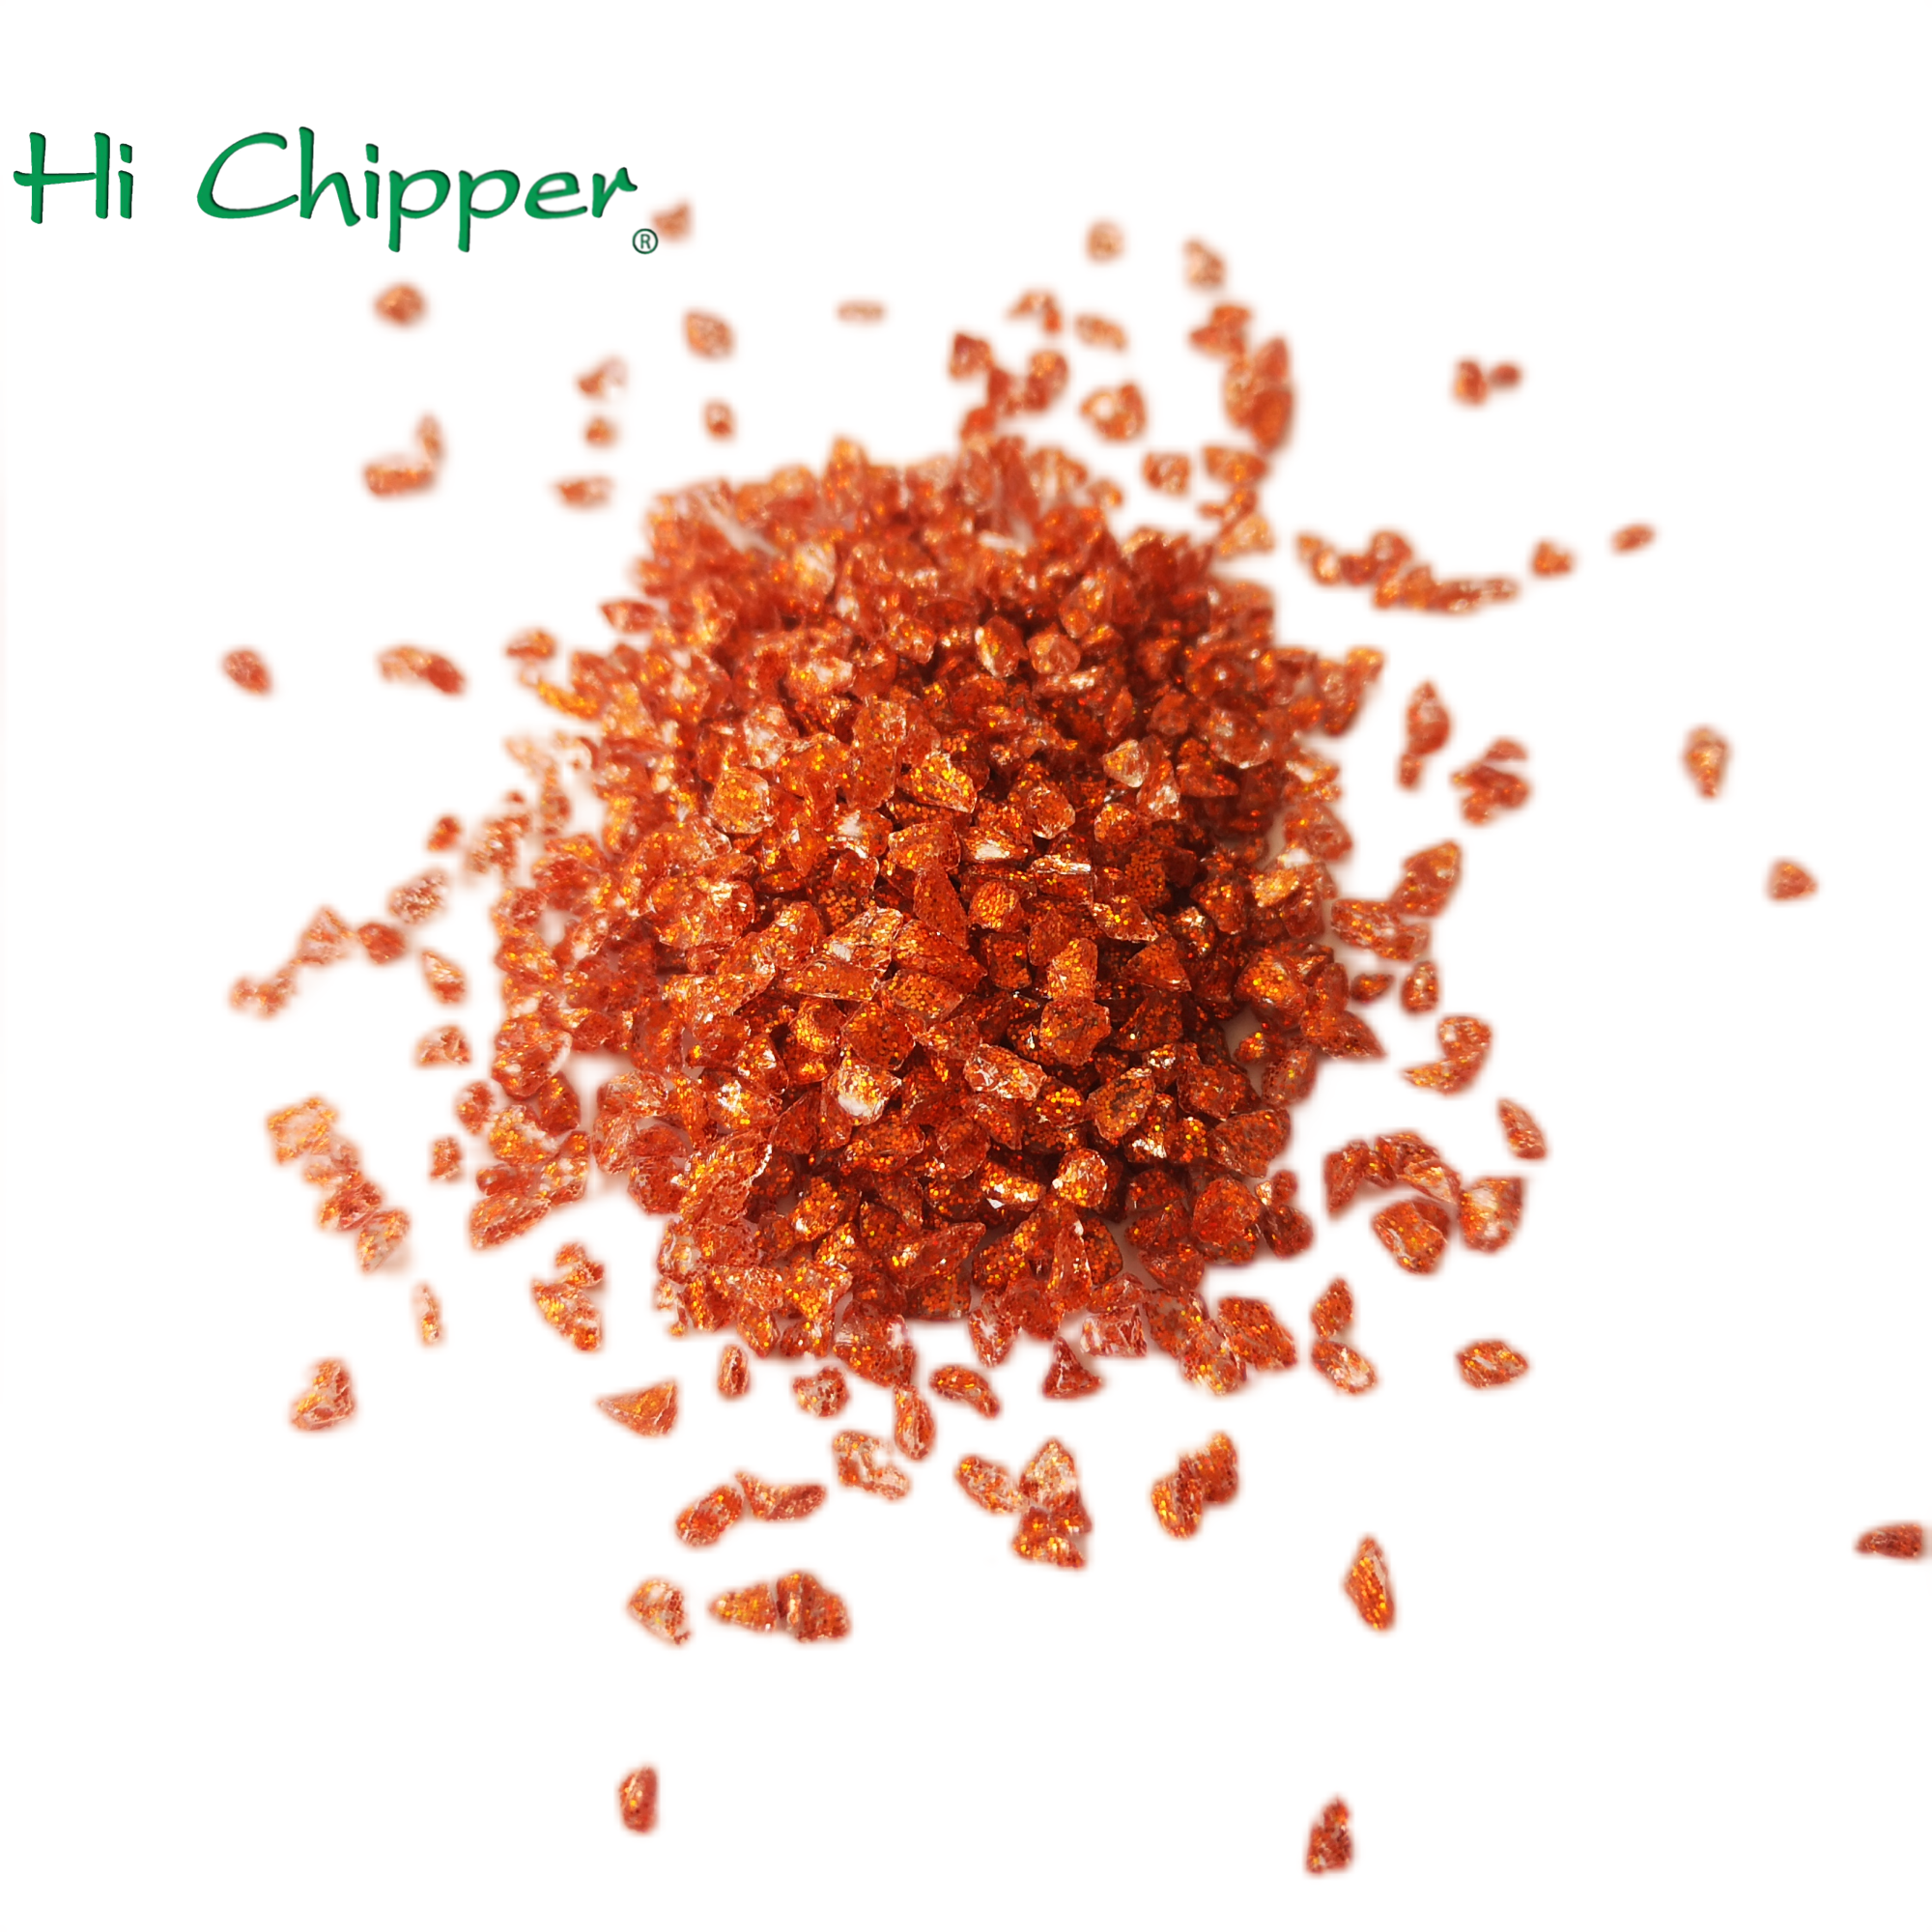 Crushed Glass Glitter Chips Nail Art DIY Parquet Decoration